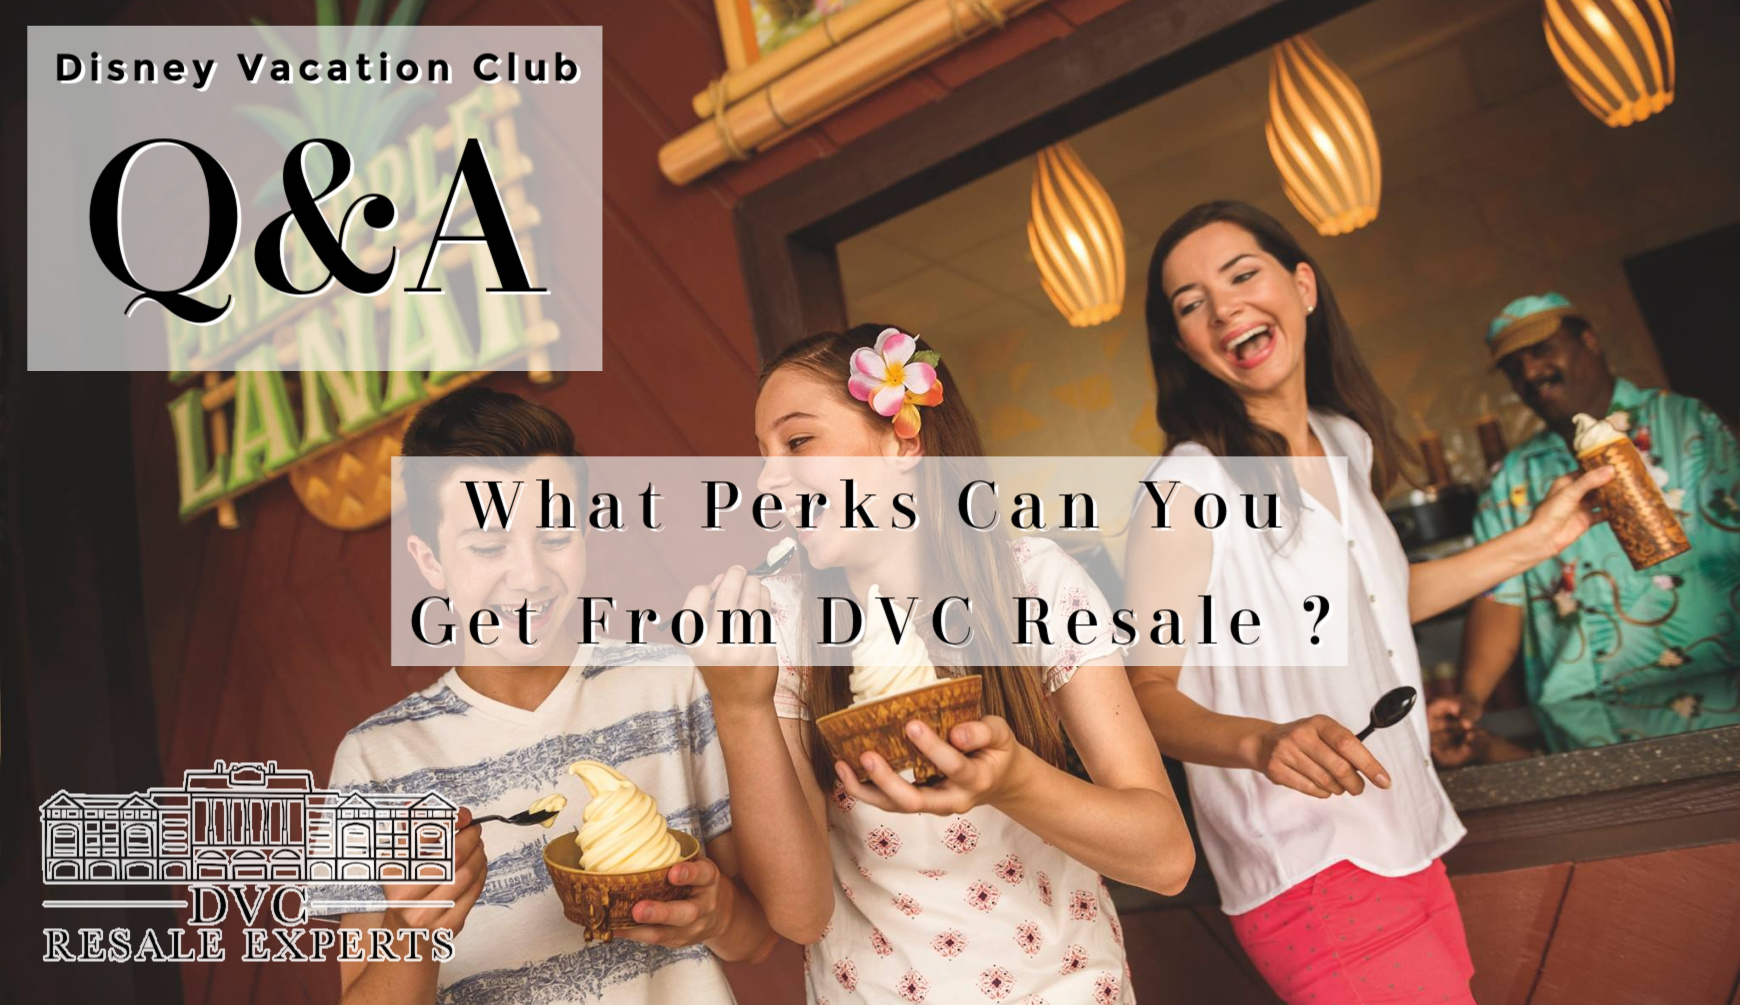 What Perks Can You Get From DVC Resale